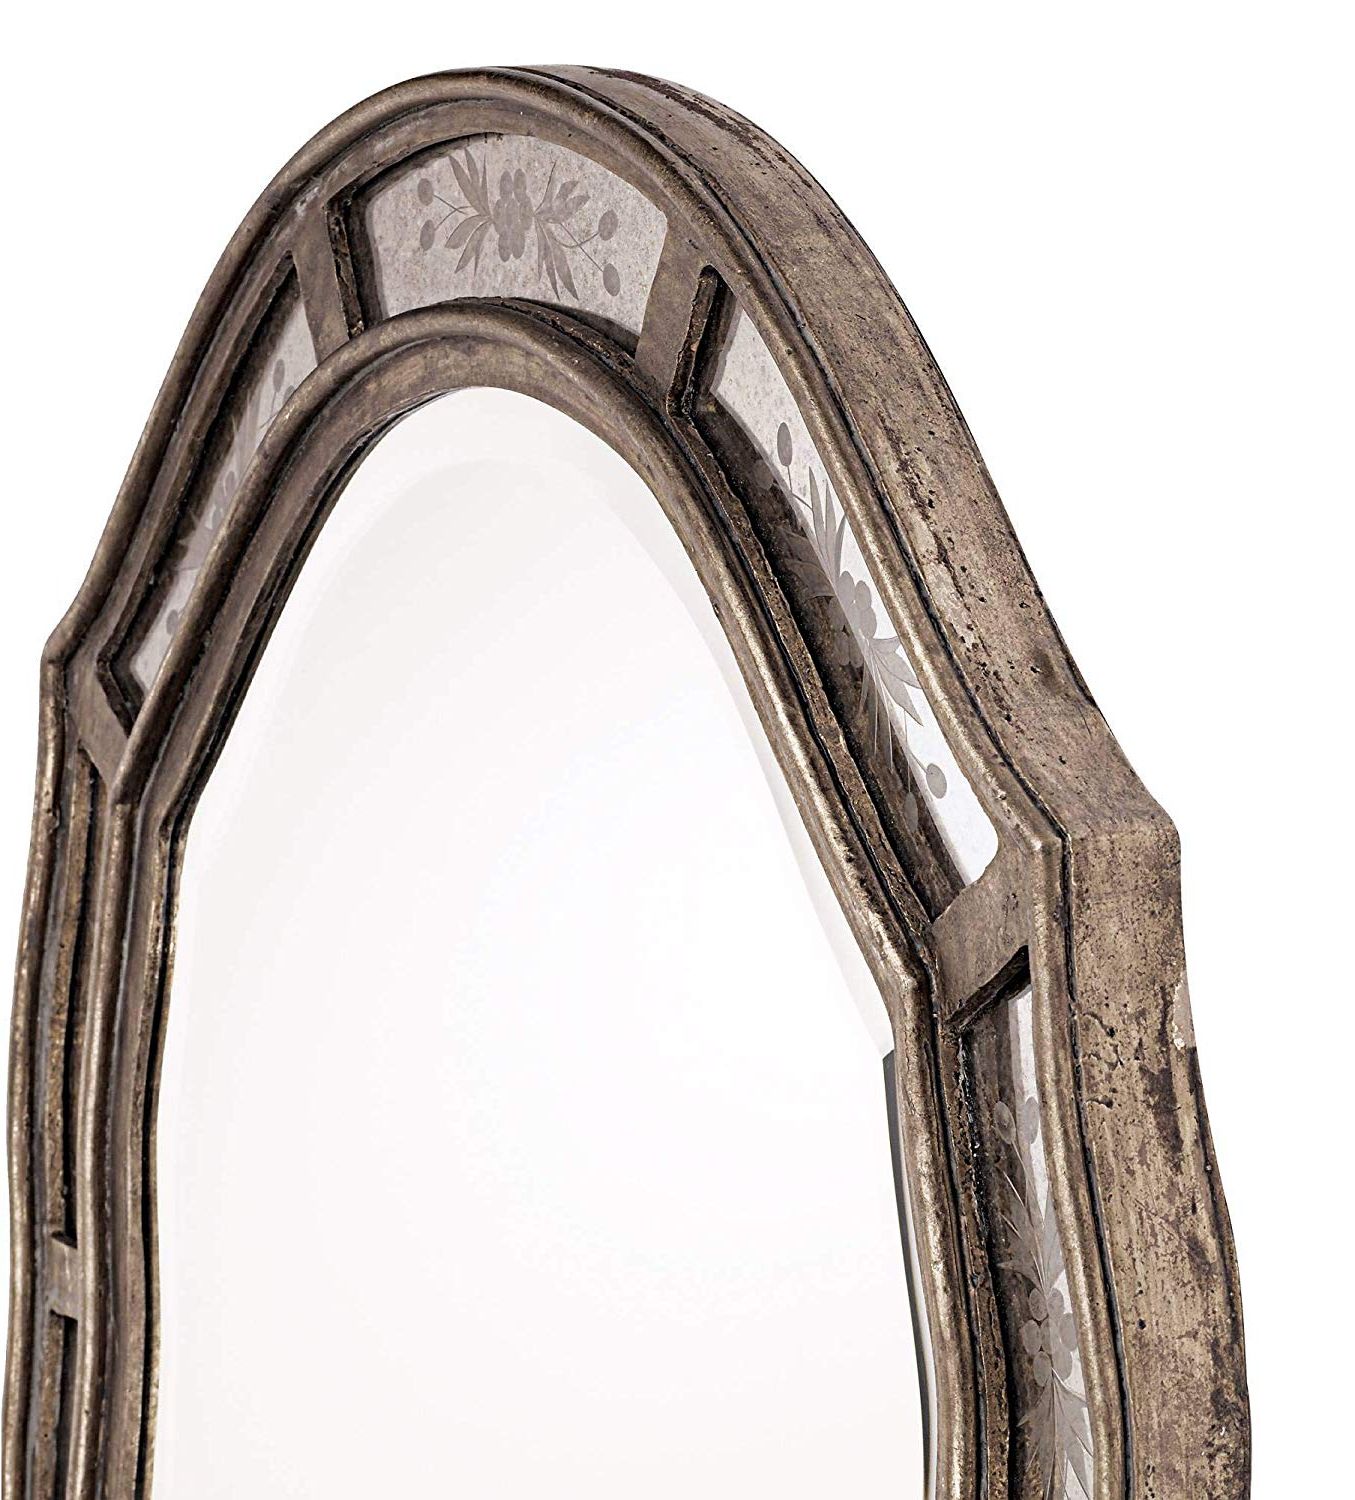 Widely Used Uttermost Fifi Etched 25" X 35" Wall Mirror Inside Fifi Contemporary Arch Wall Mirrors (View 13 of 20)